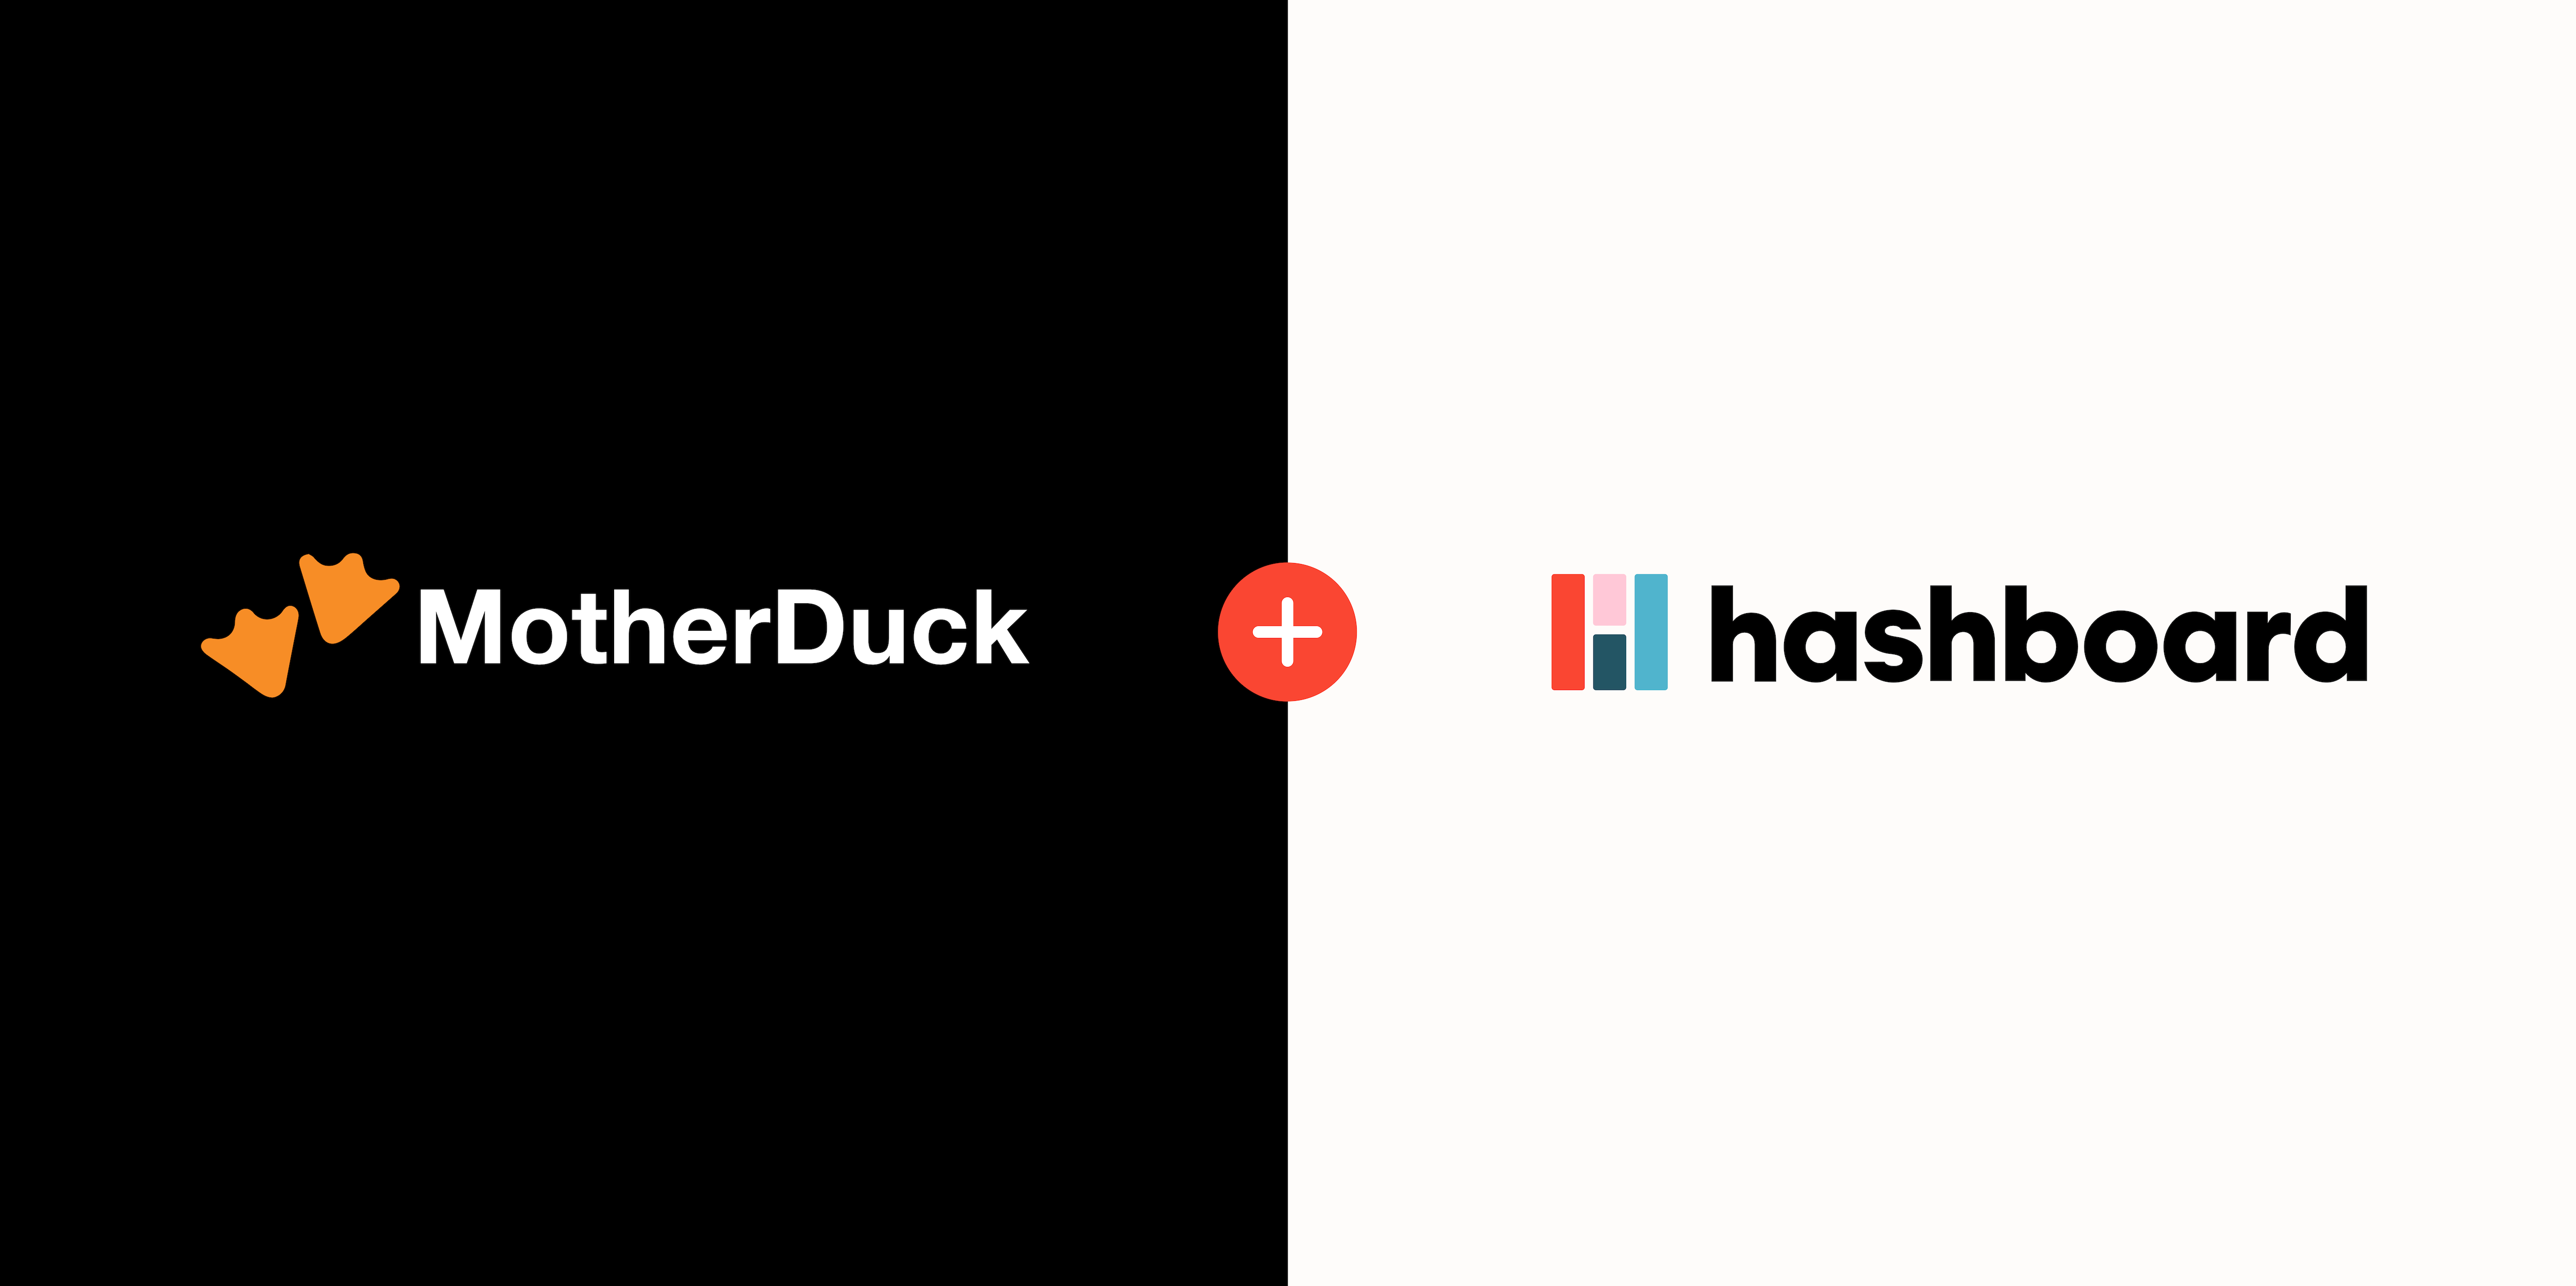 Side by side MotherDuck and Hashboard logos